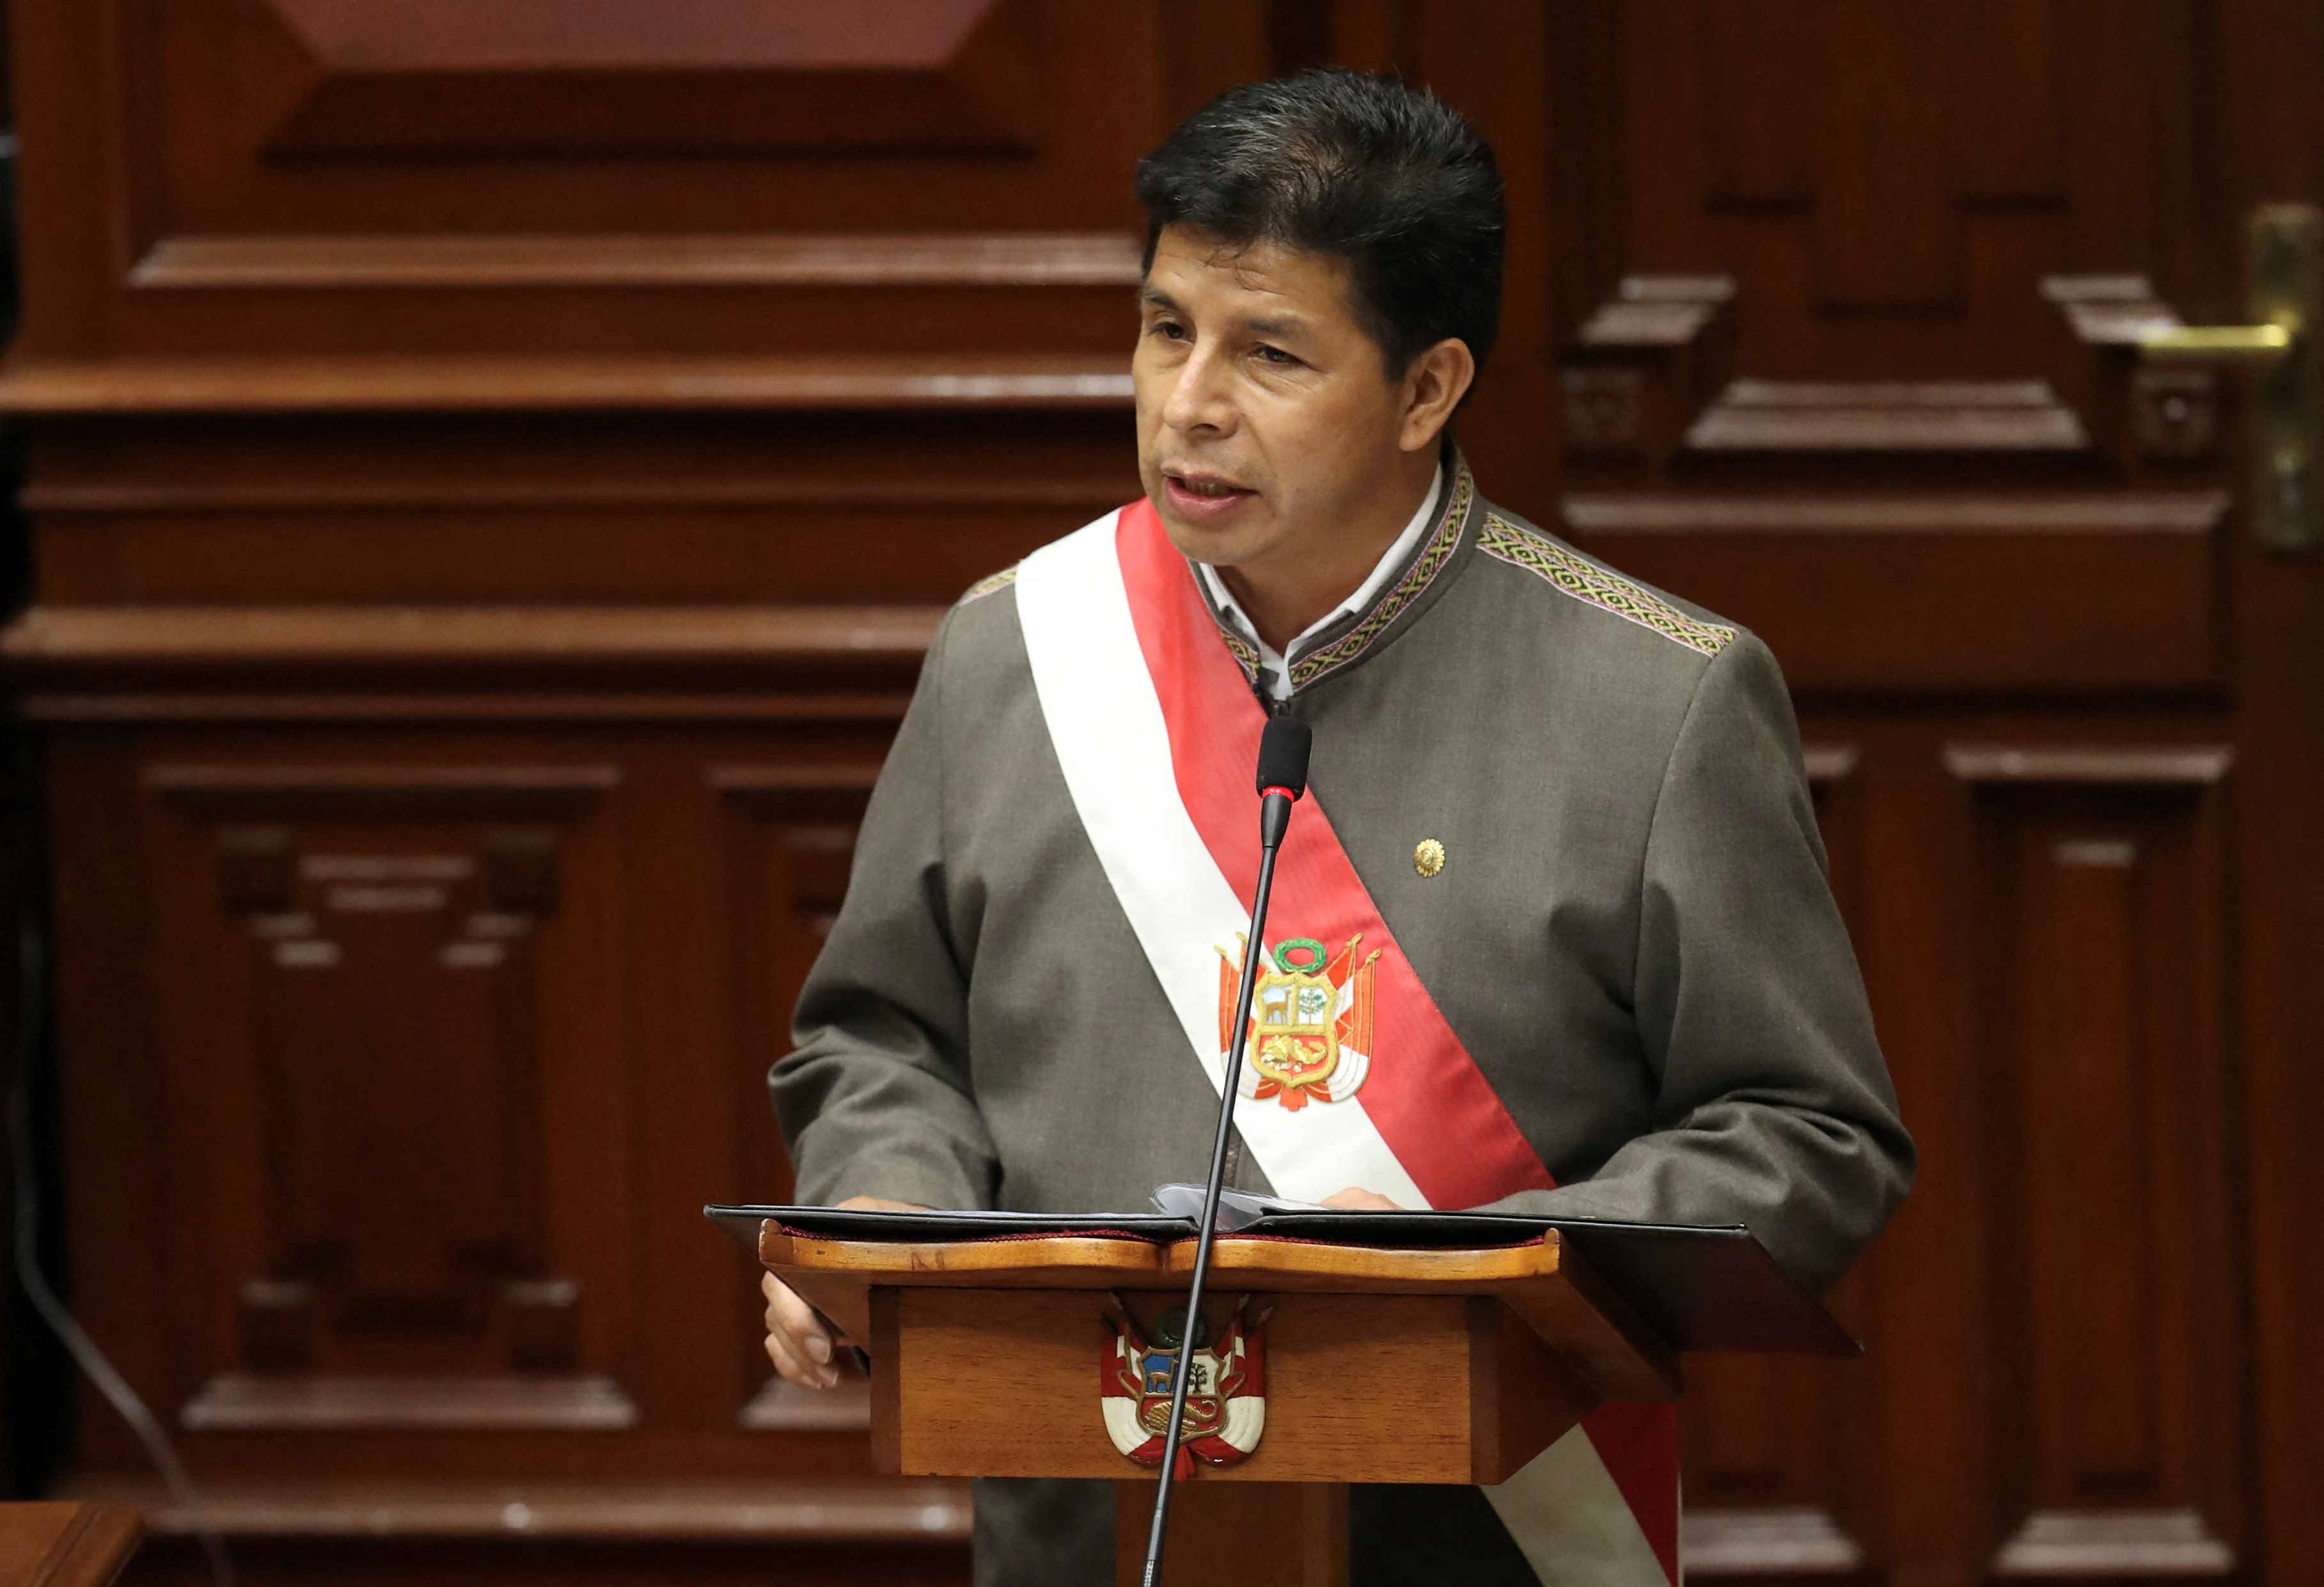 Peruvian President Pedro Castillo addresses congress as he faces an impeachment vote, in Lima, Peru March 28, 2022. Ernesto Arias/Peru's Congress of the Republic/Handout via REUTERS ATTENTION EDITORS - THIS IMAGE HAS BEEN SUPPLIED BY A THIRD PARTY. NO RESALES. NO ARCHIVES